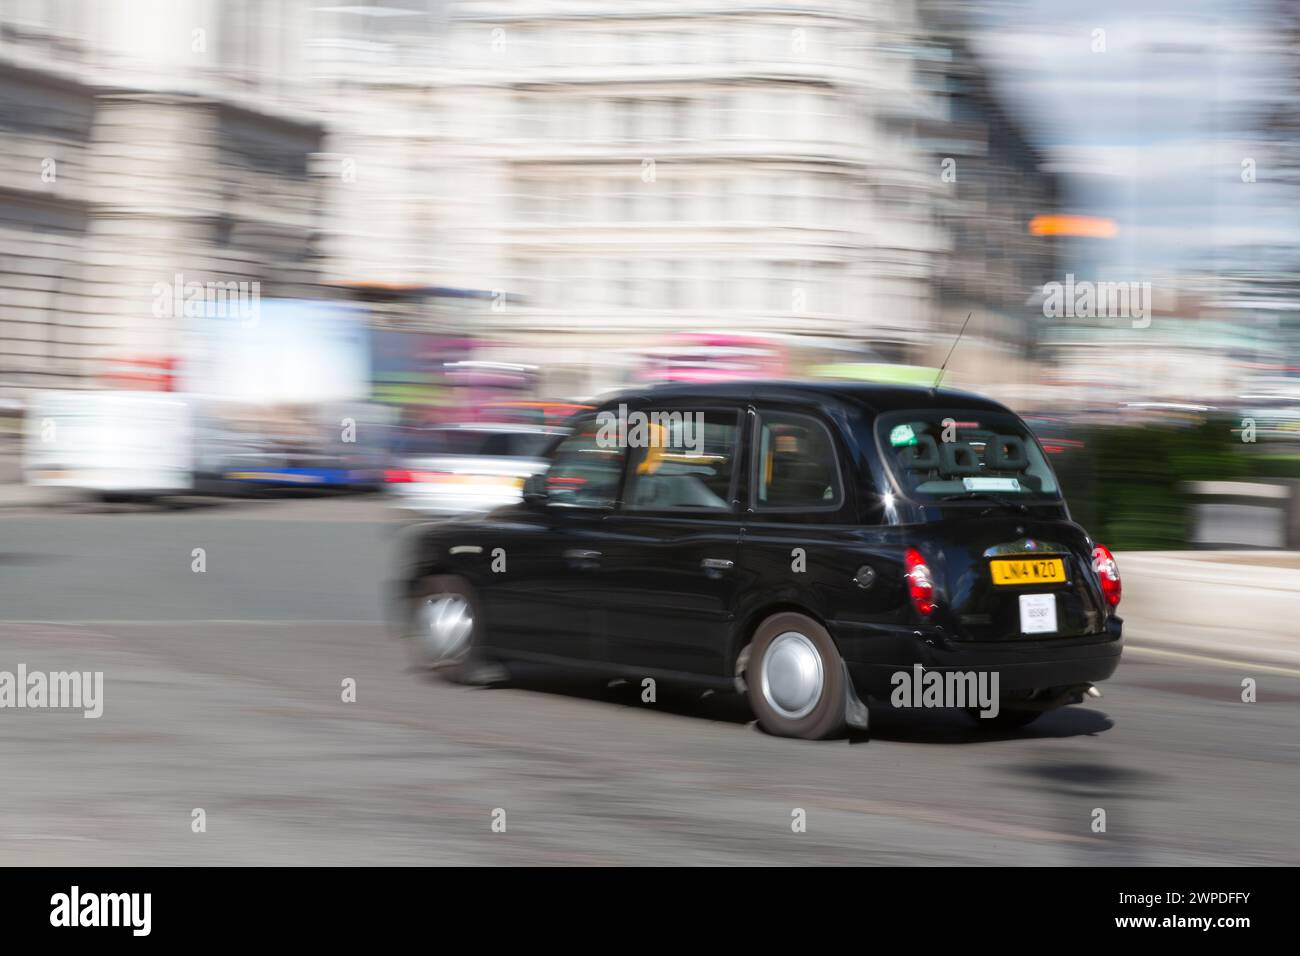 UK, London, Black Taxi cab panned in Parliament square. Stock Photo